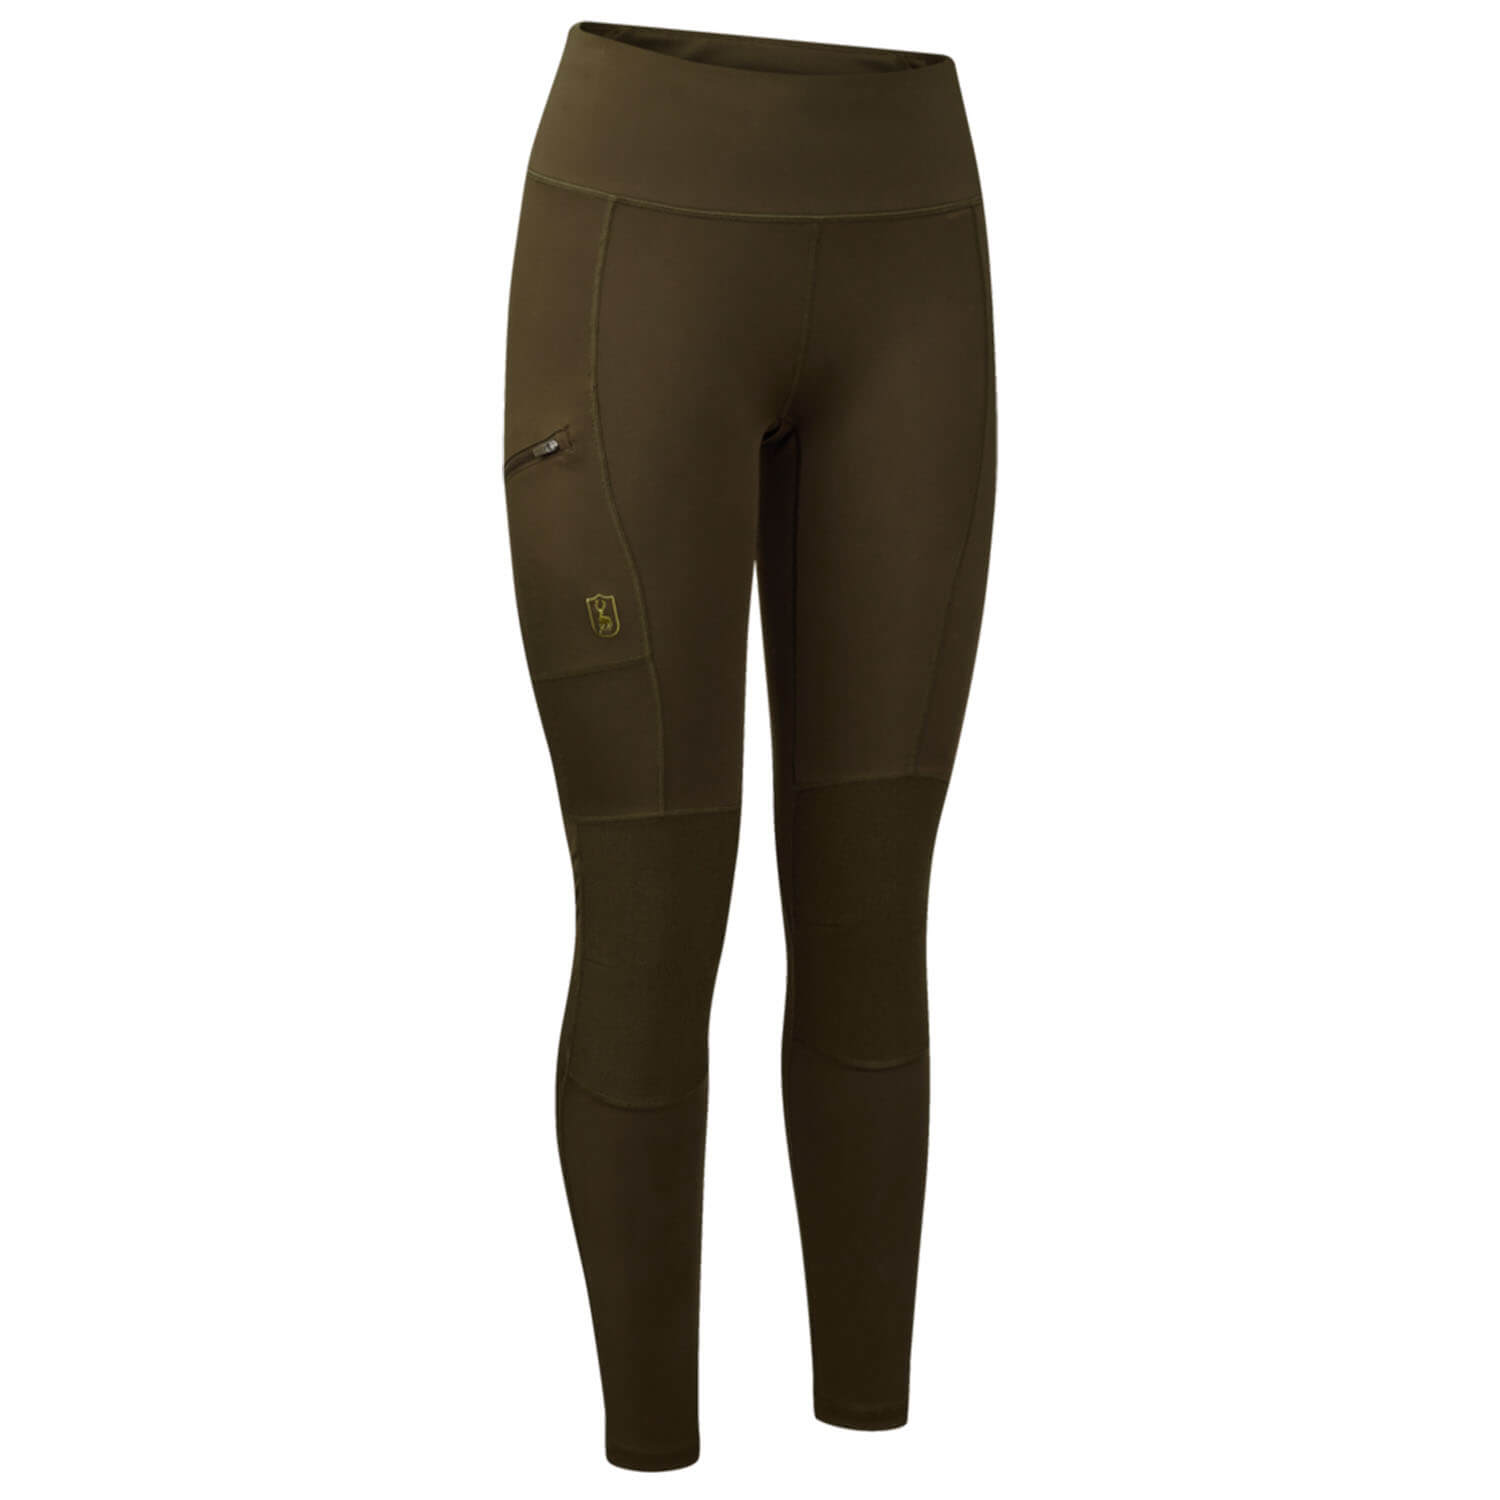 Deerhunter Tights Lady reinforced - Women's Hunting Clothing 